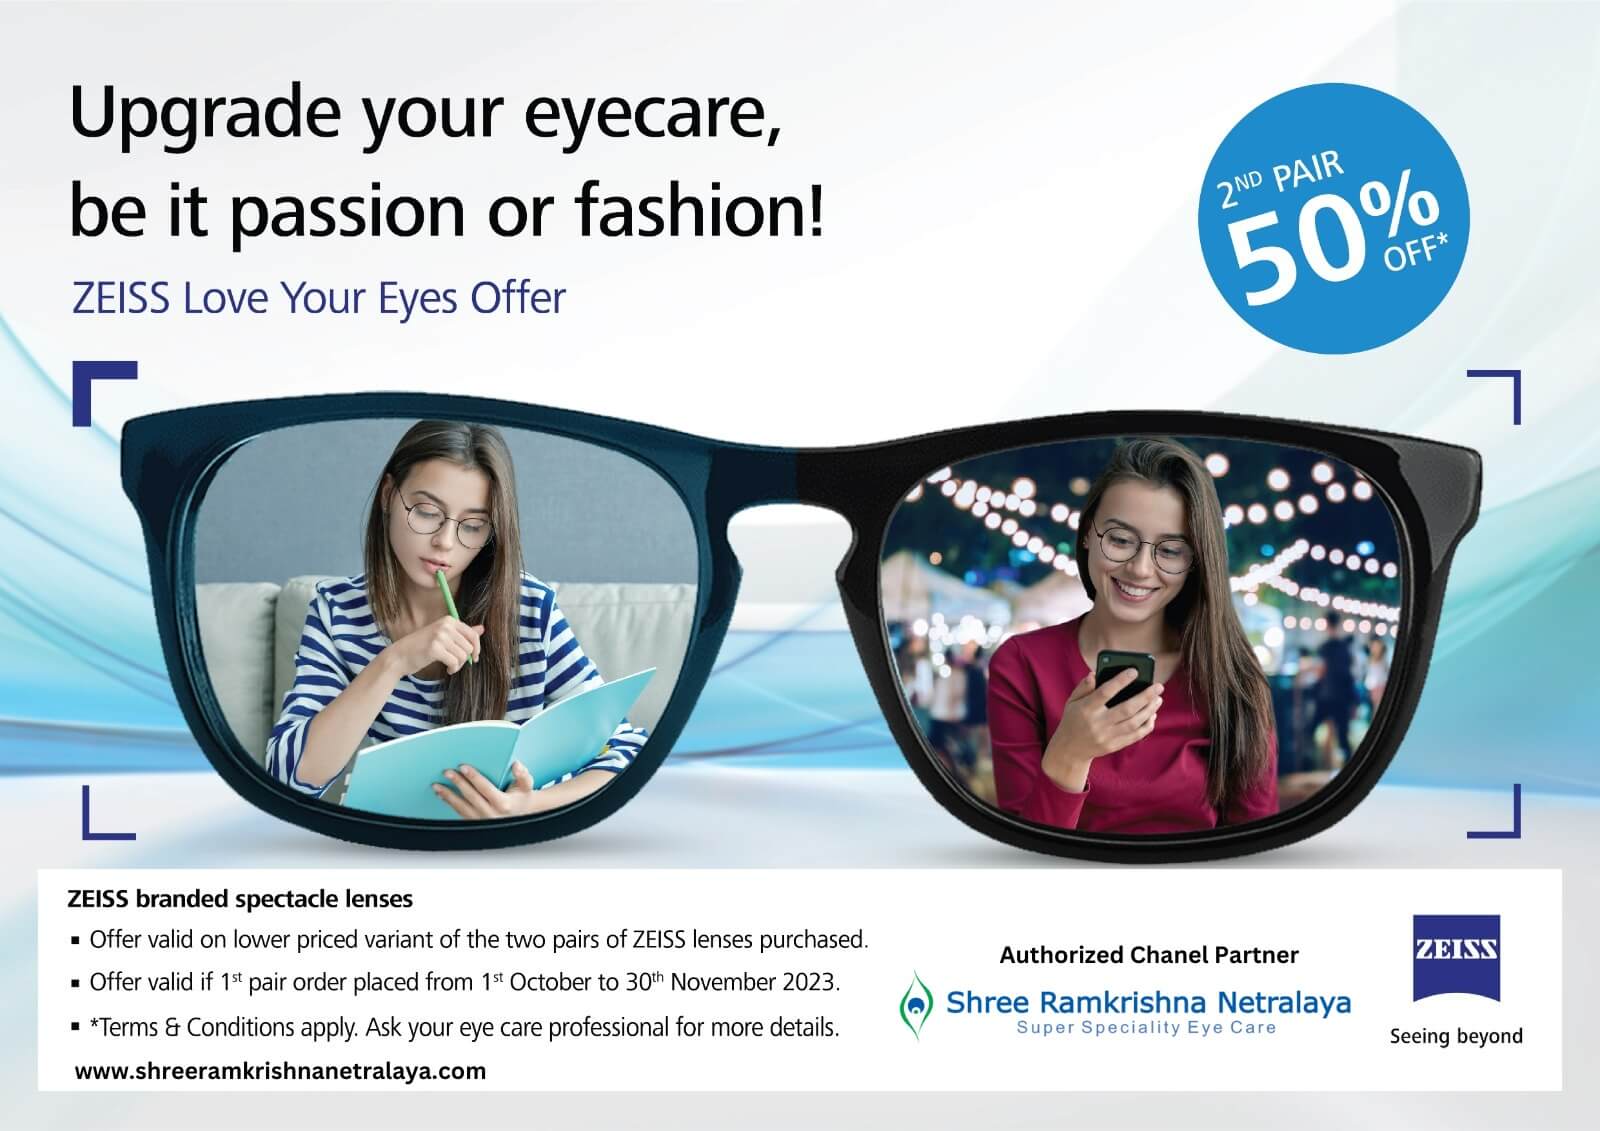 zeiss  branded spectacle lenses advertisement-1